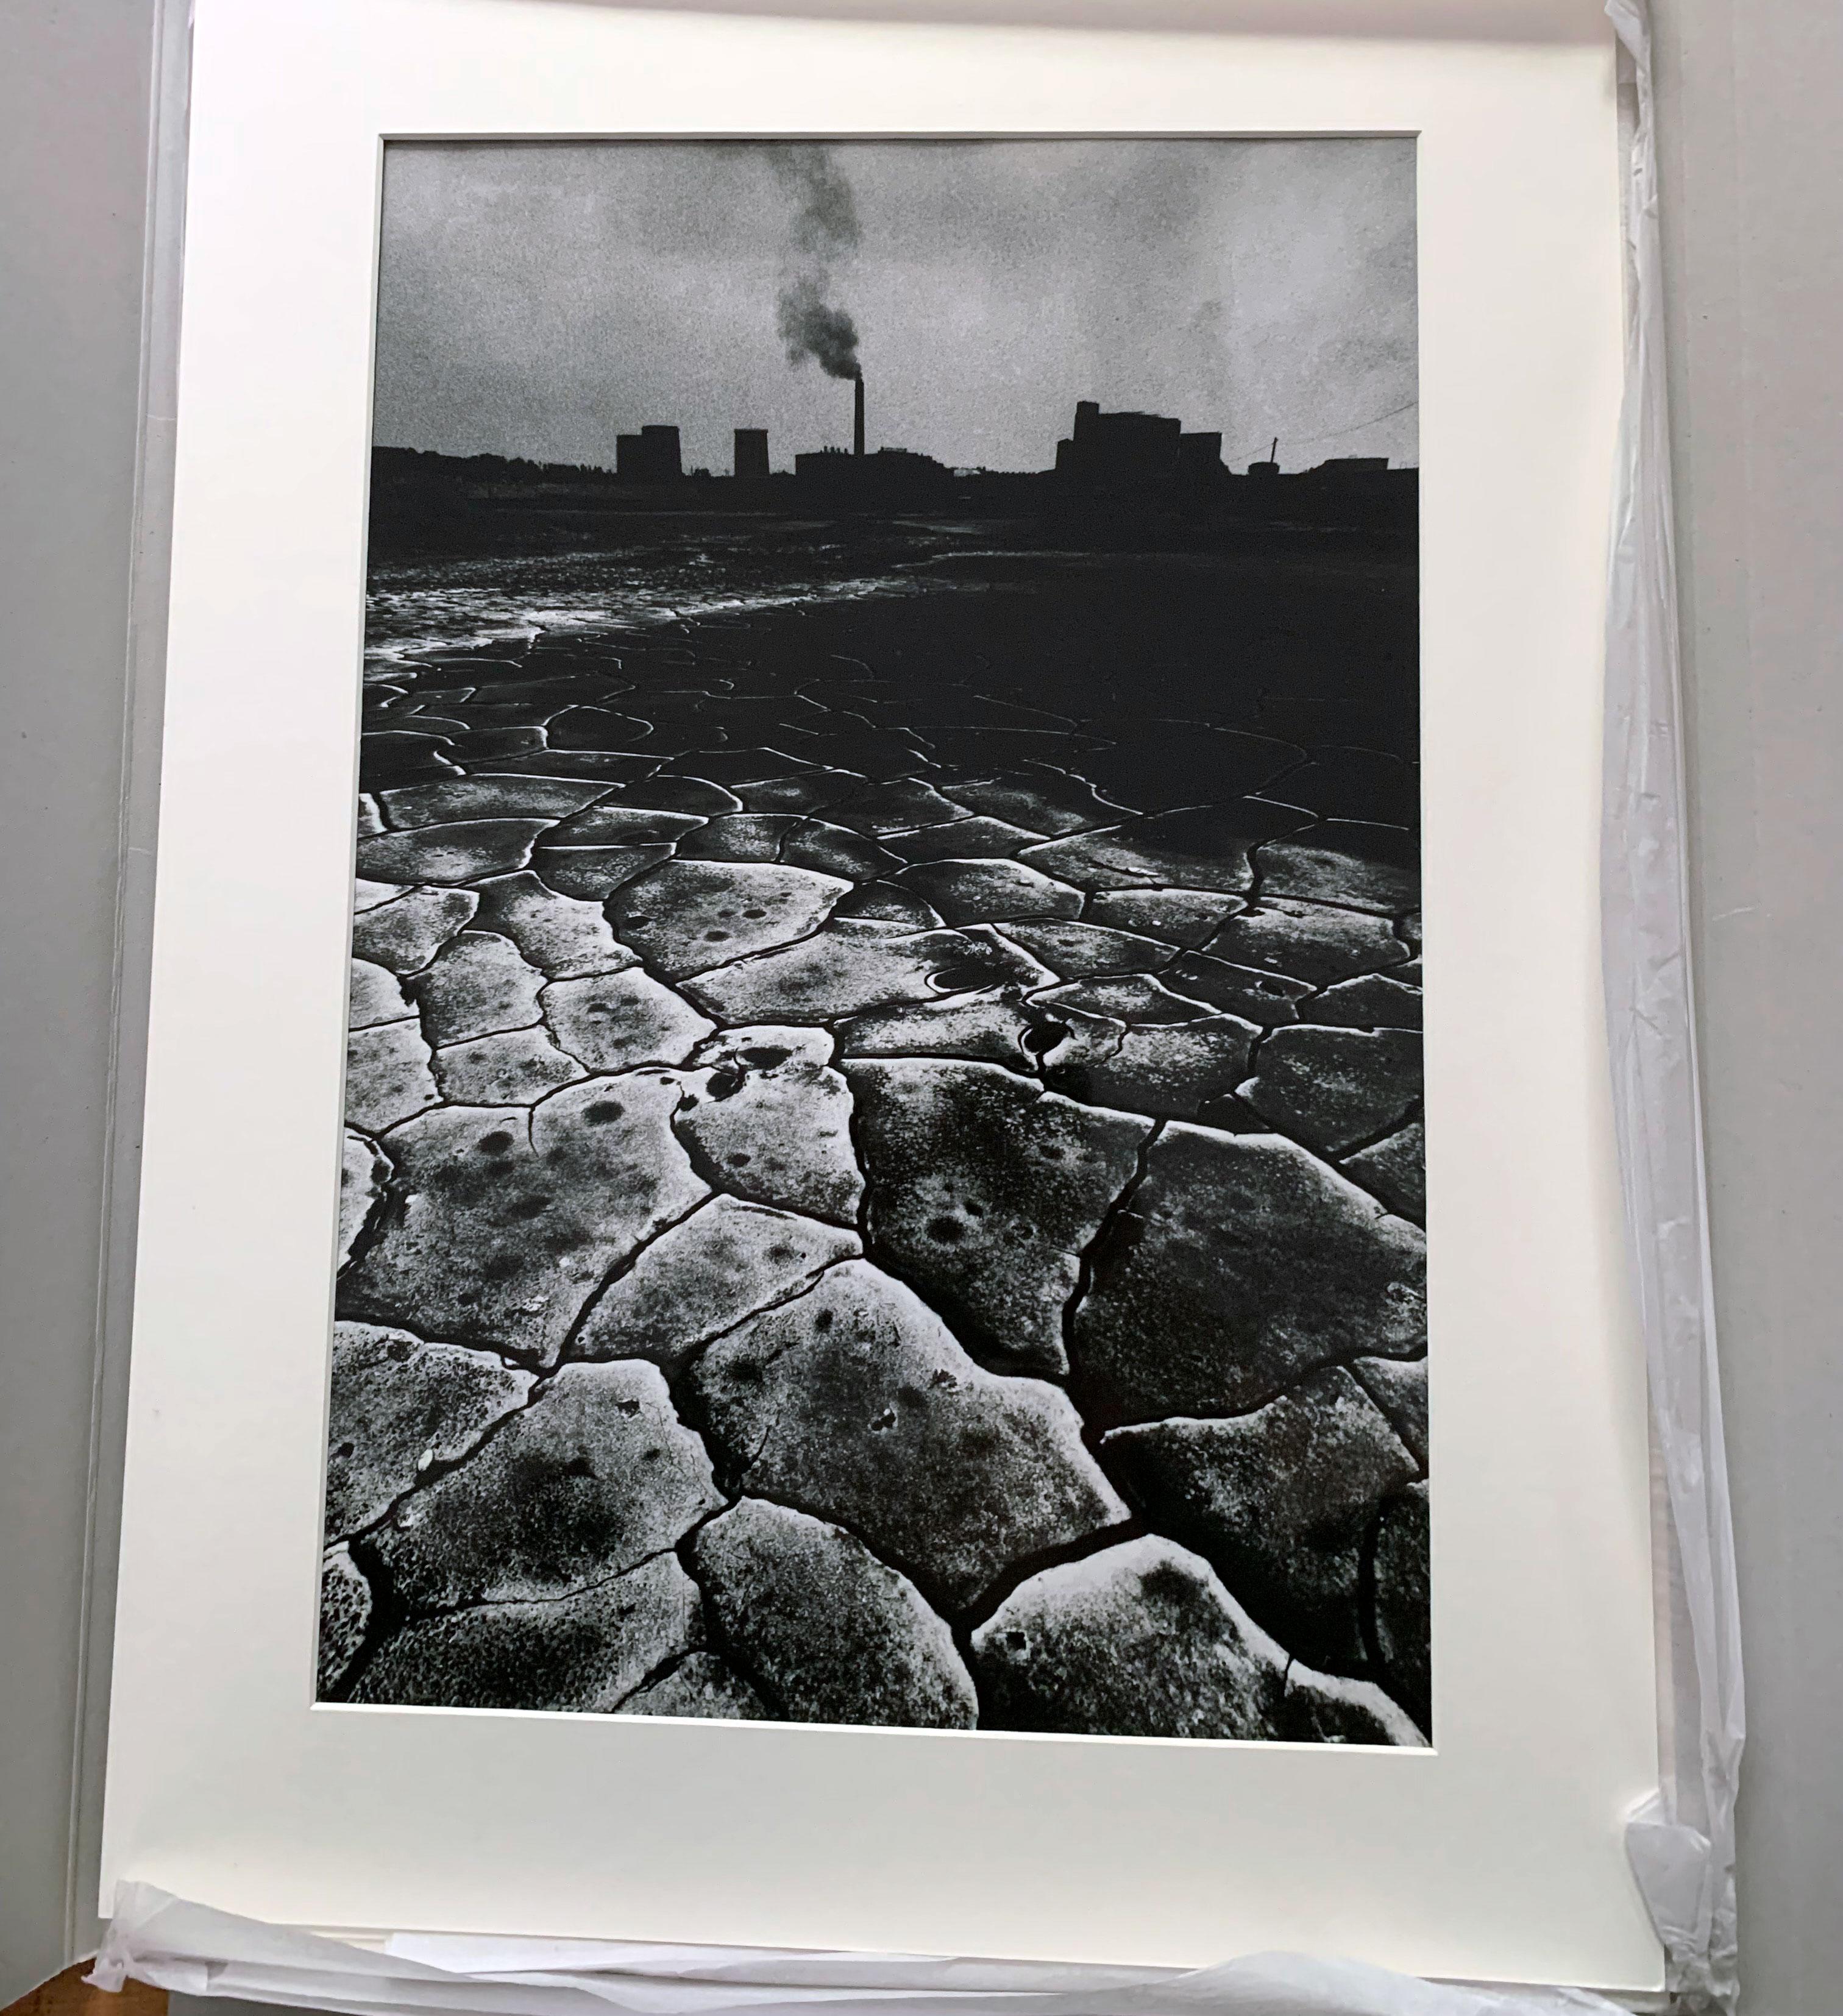 The Landscape around the Marcel Mine, Radlin - Industrial - Rare Vintage Print - Photograph by Michal Cala